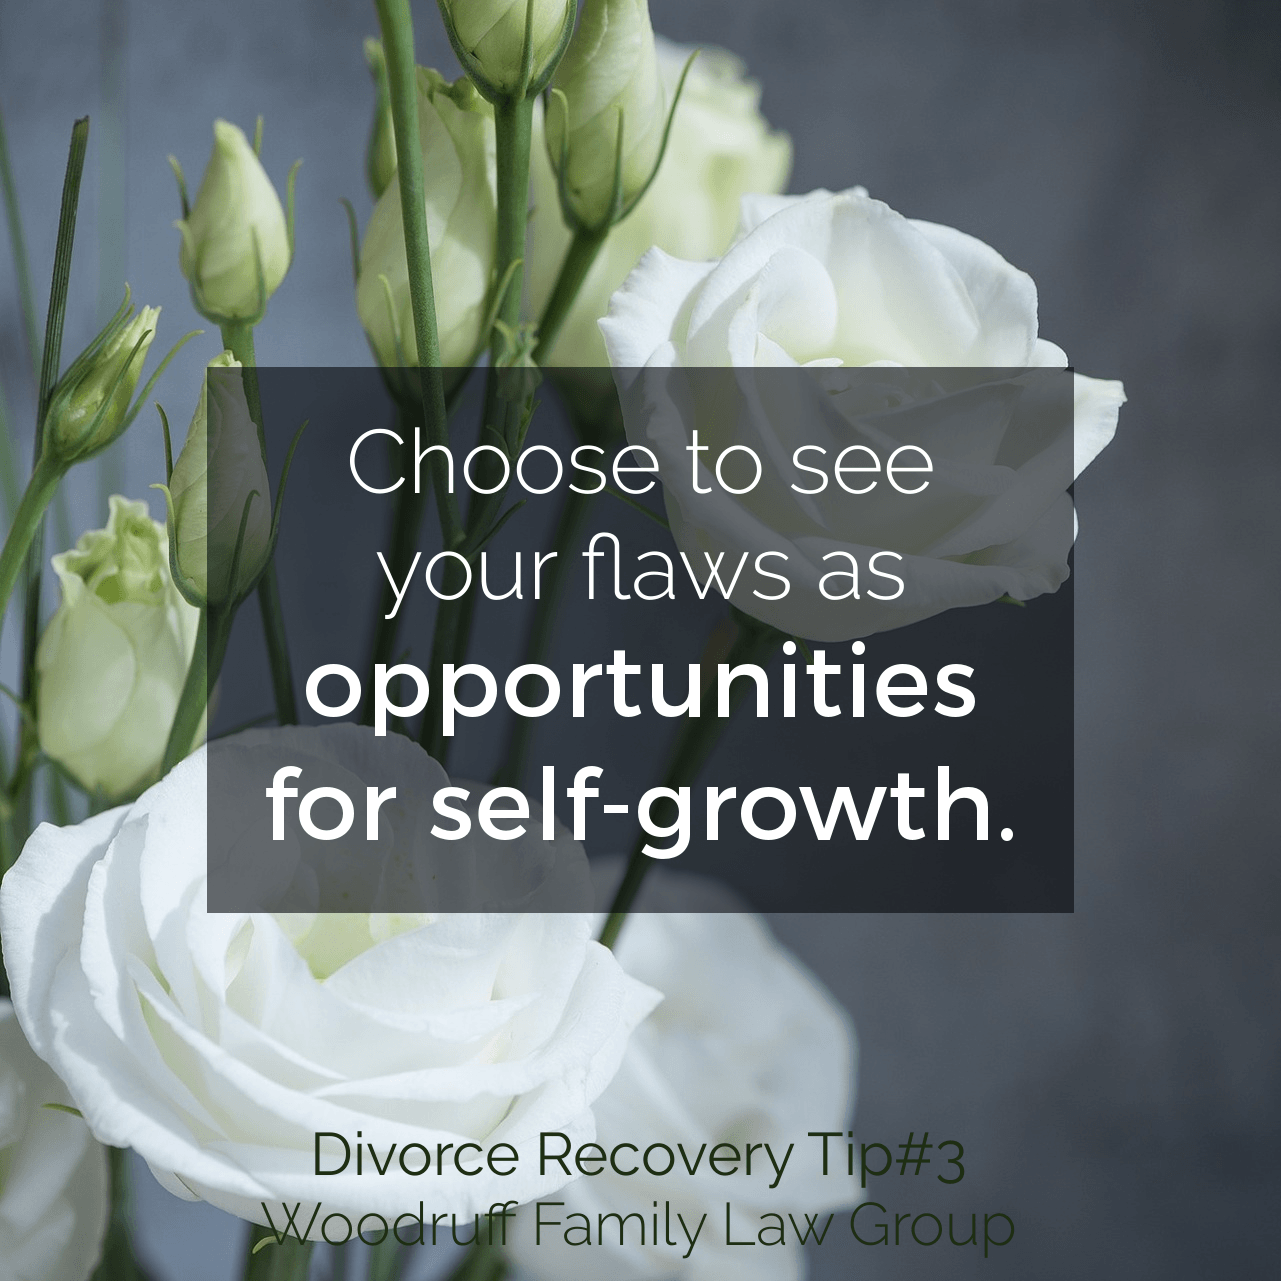 Divorce Recovery Tip 3 - Choose to see your flaws as opportunities for self-growth.